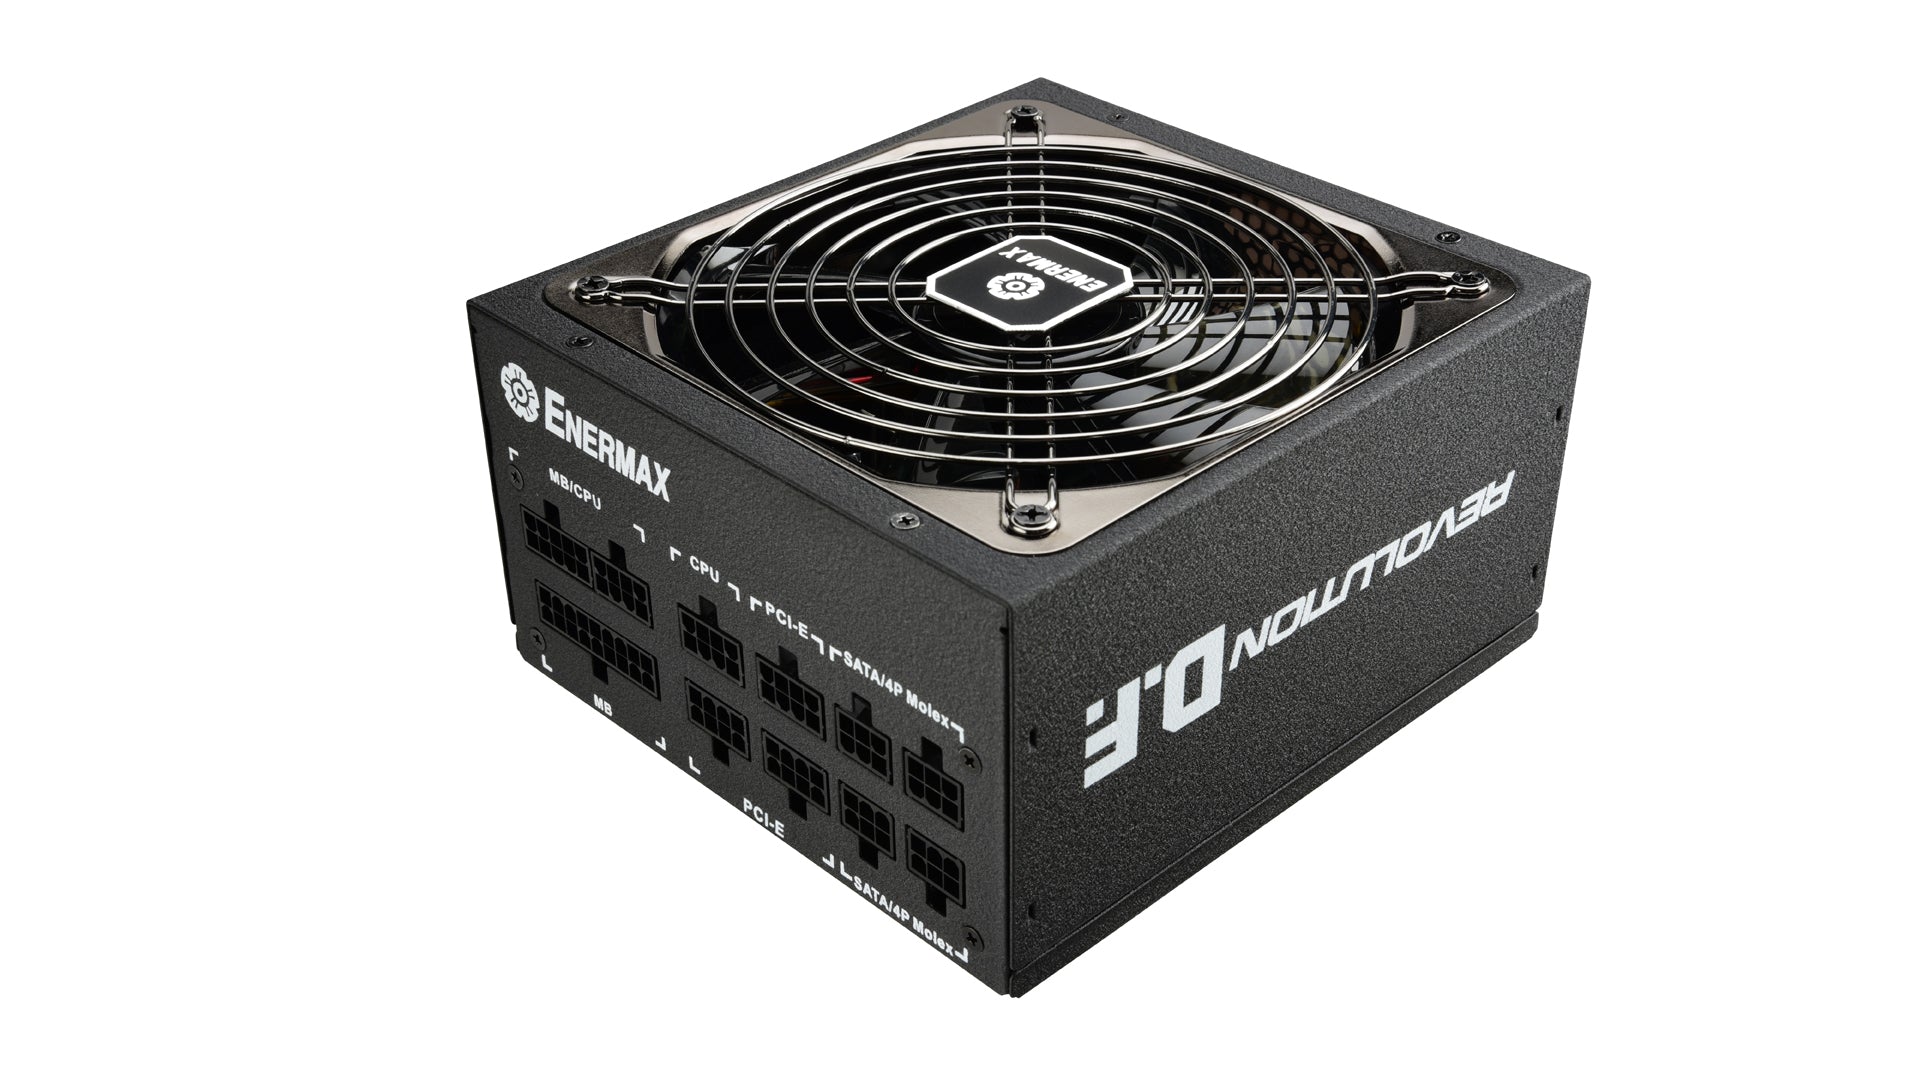 REVOLUTION D.F. 750W / 80 PLUS® Gold Certified Power Supply (Refurbished)